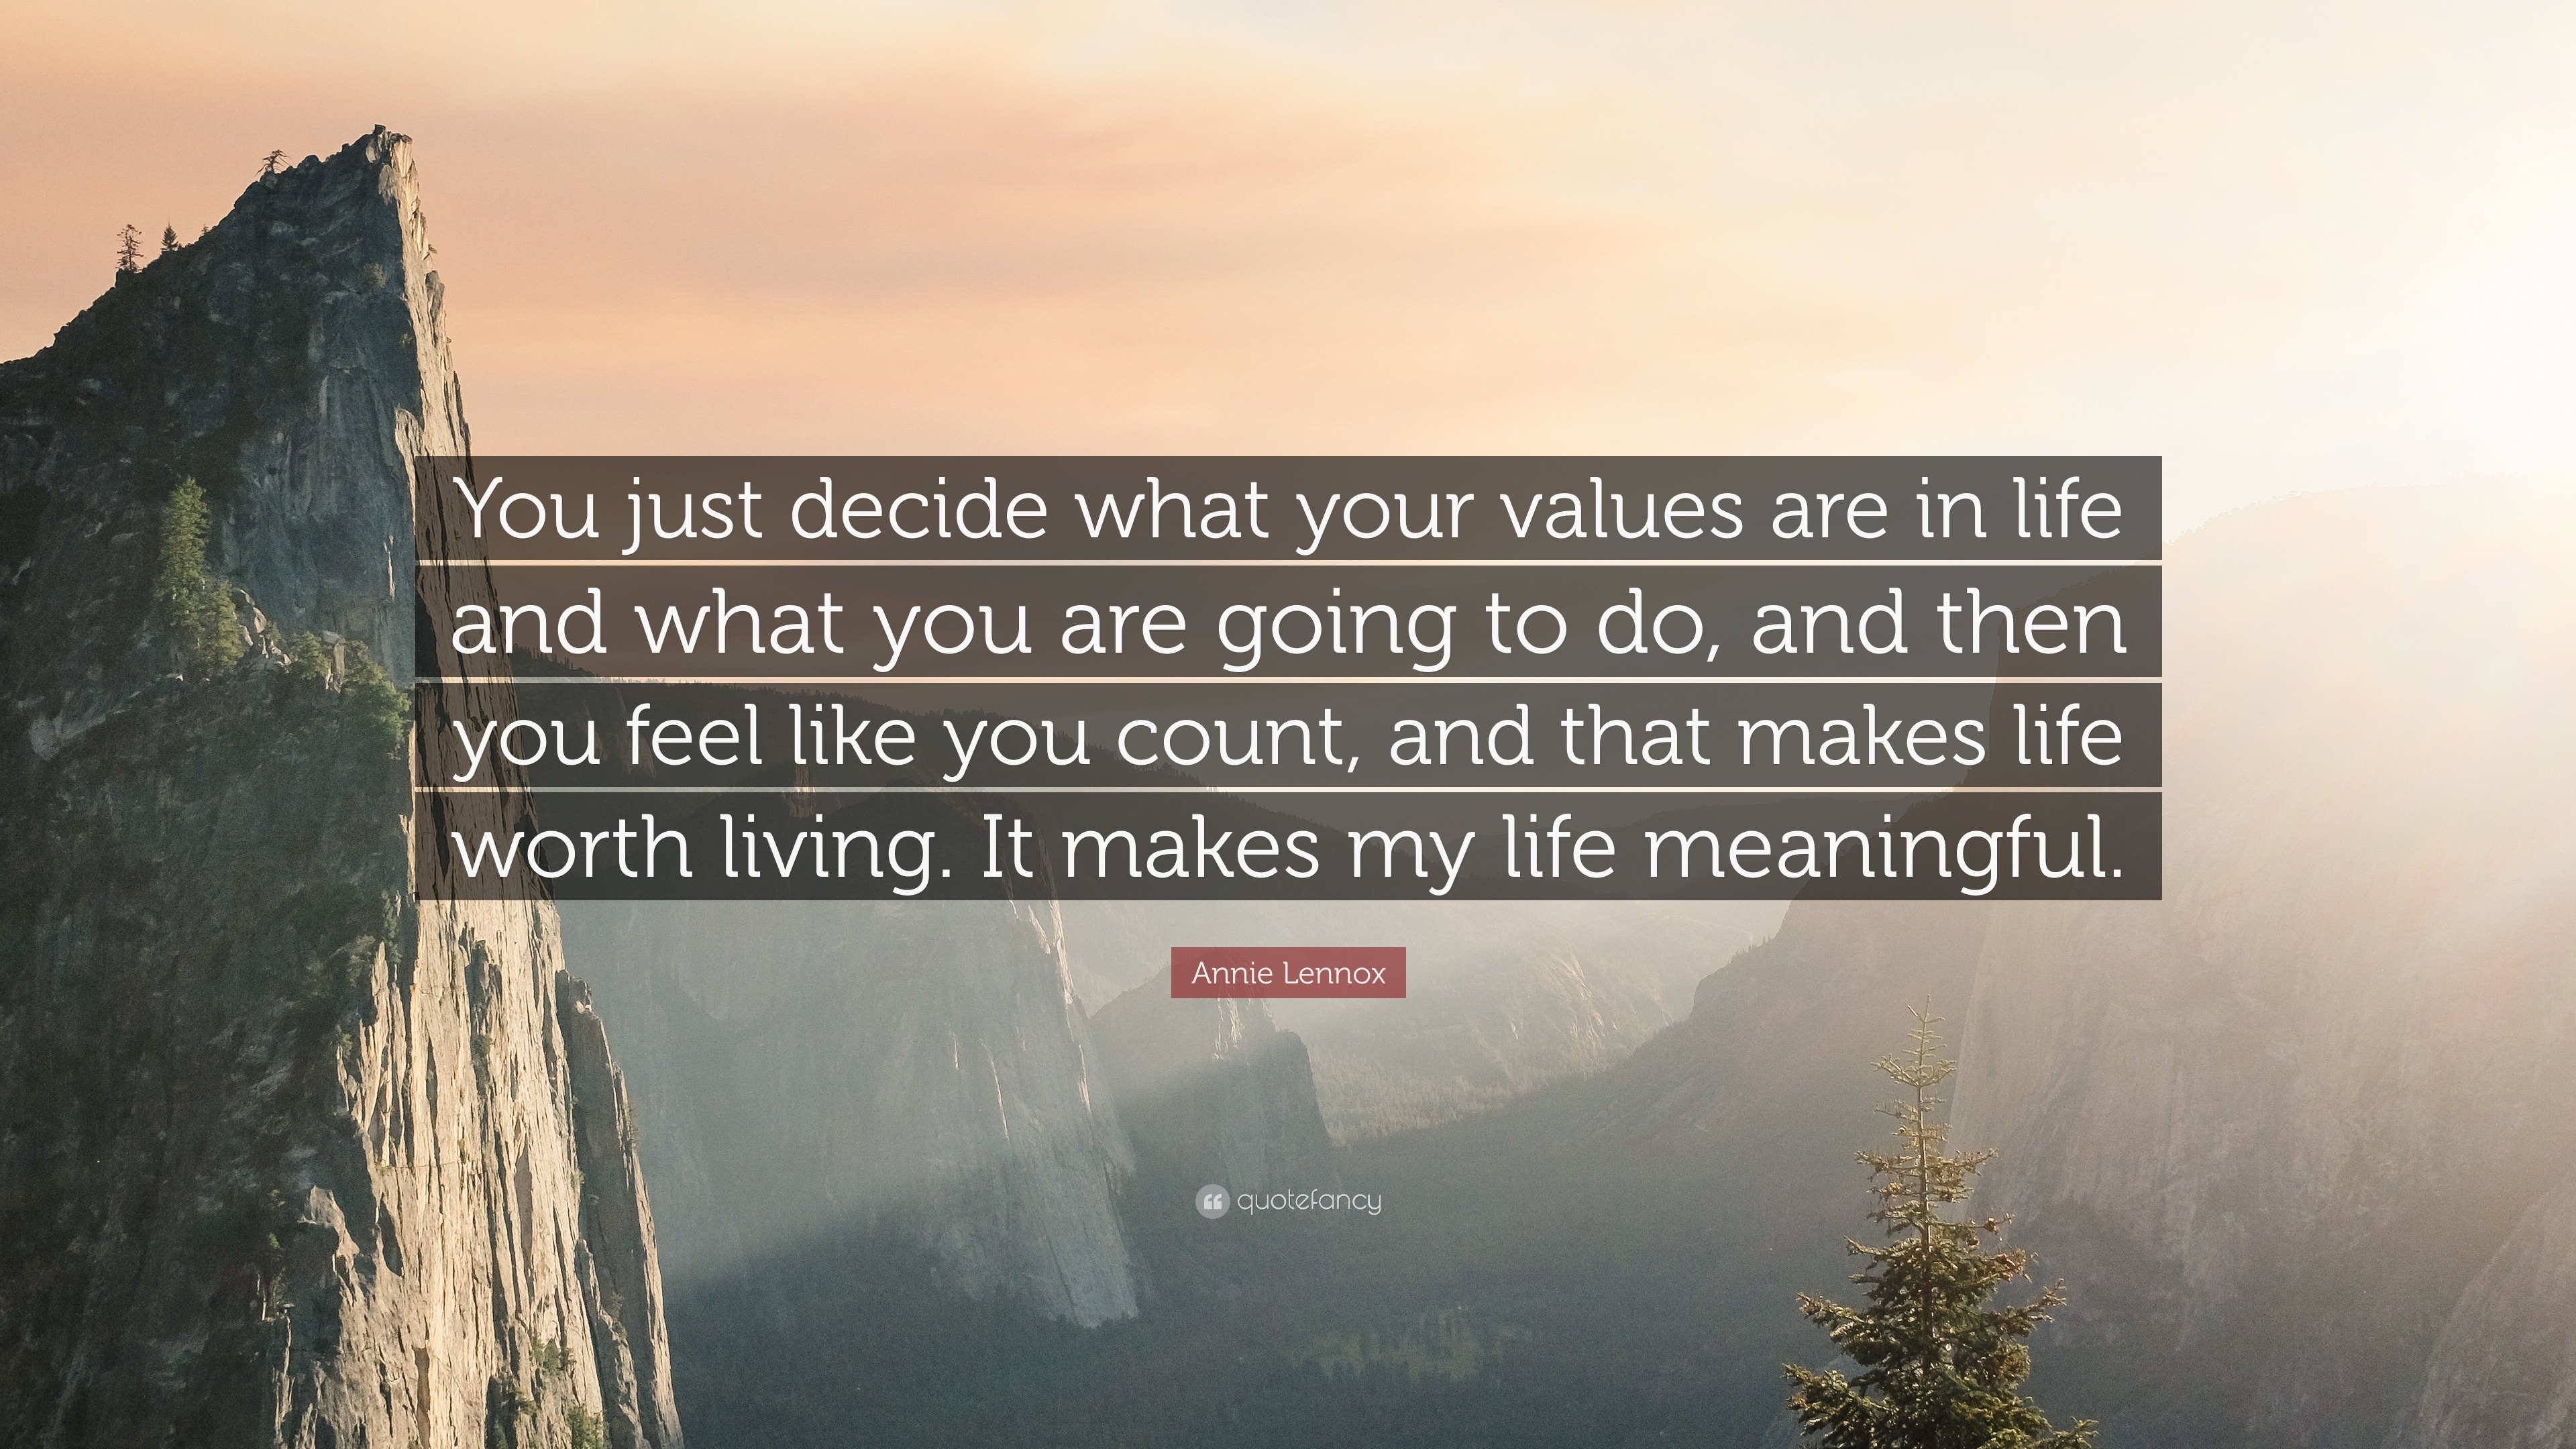 Annie Lennox Quote “You just decide what your values are in life and what